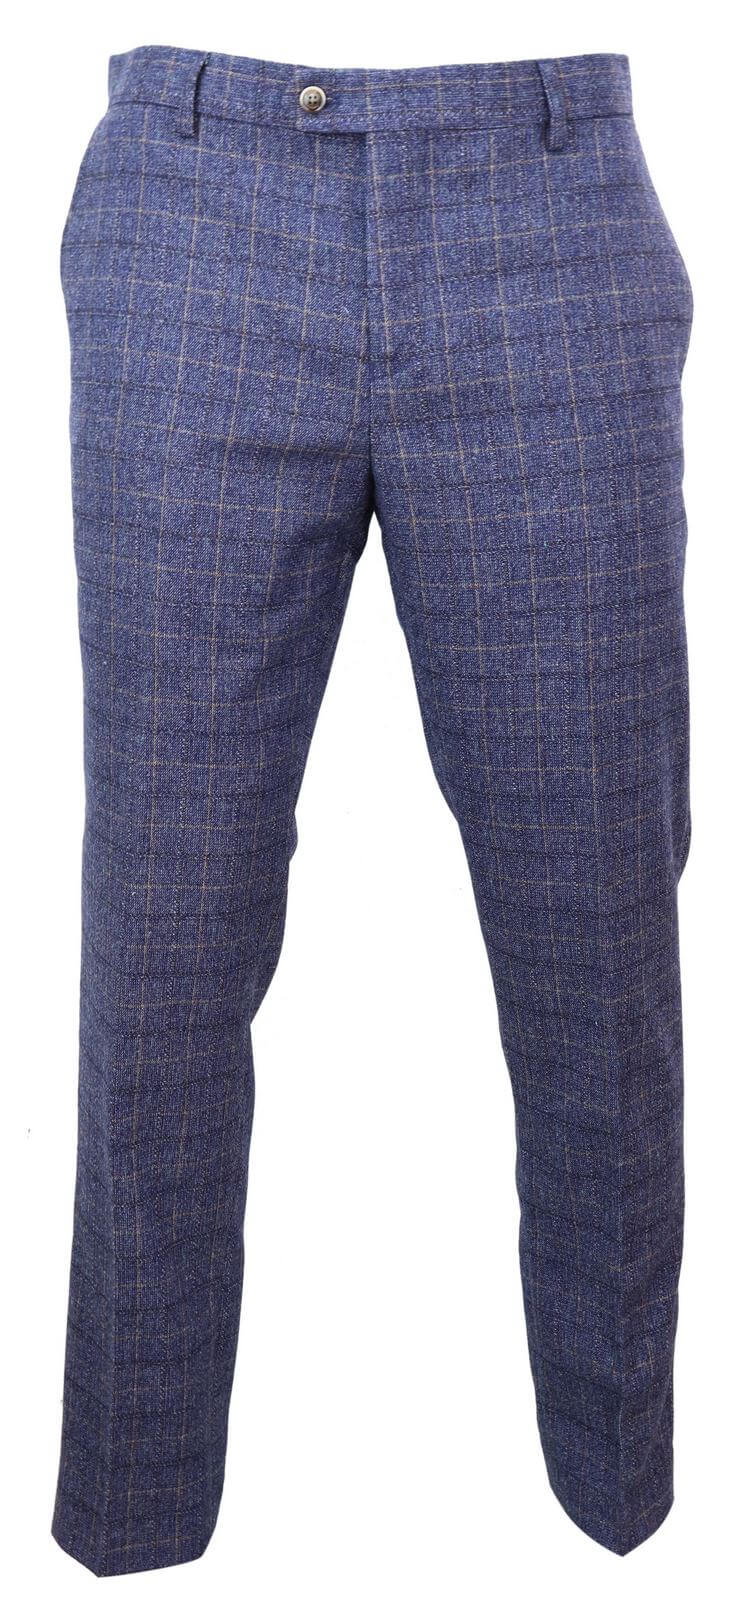 Discover more than 148 mens blue check trousers - camera.edu.vn